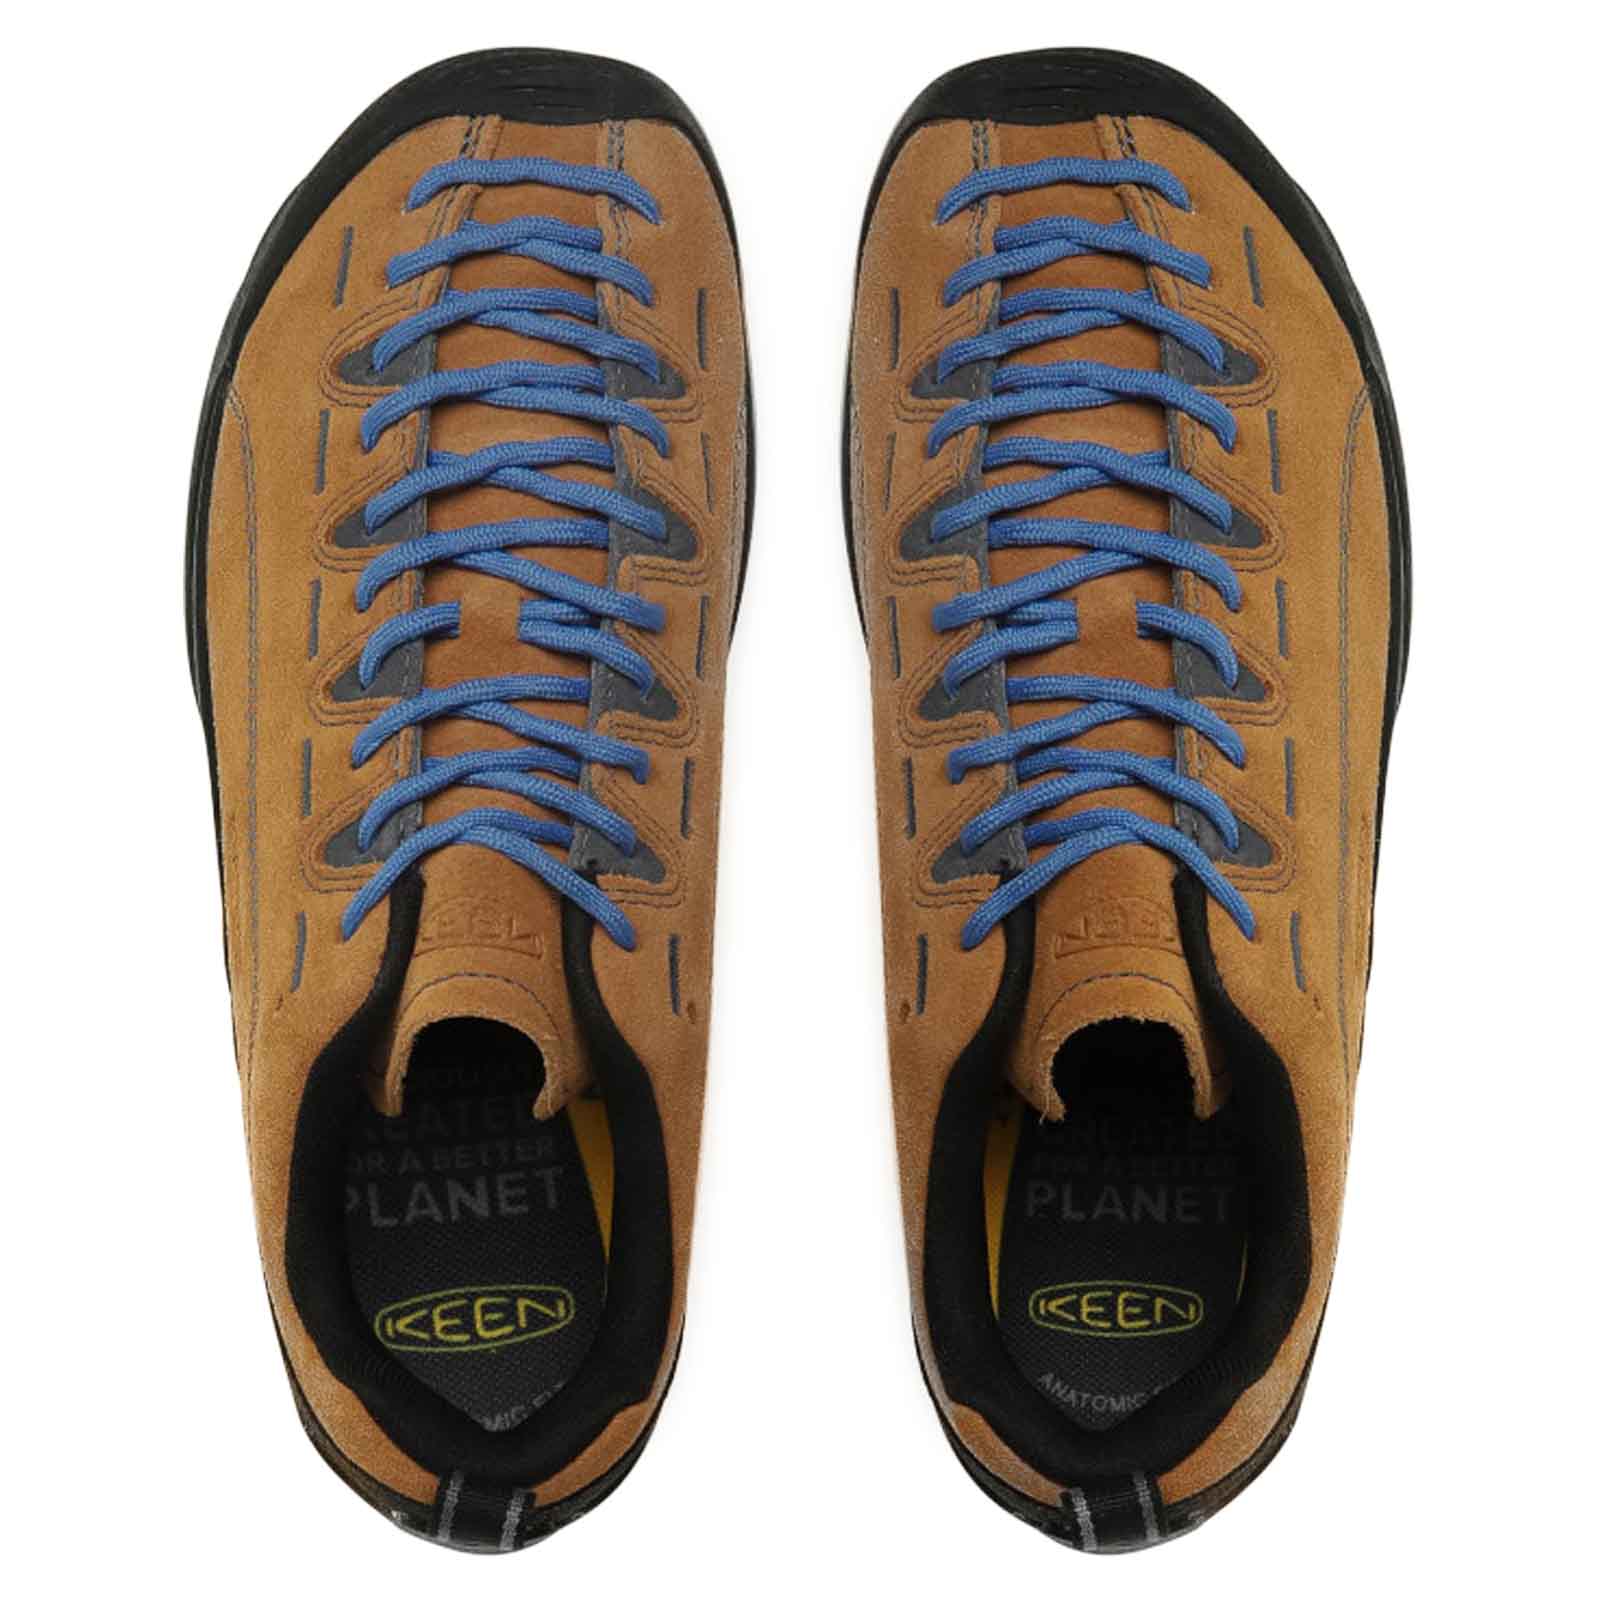 Keen Jasper Suede Textile Mens Sneakers#color_cathay spice orion blue